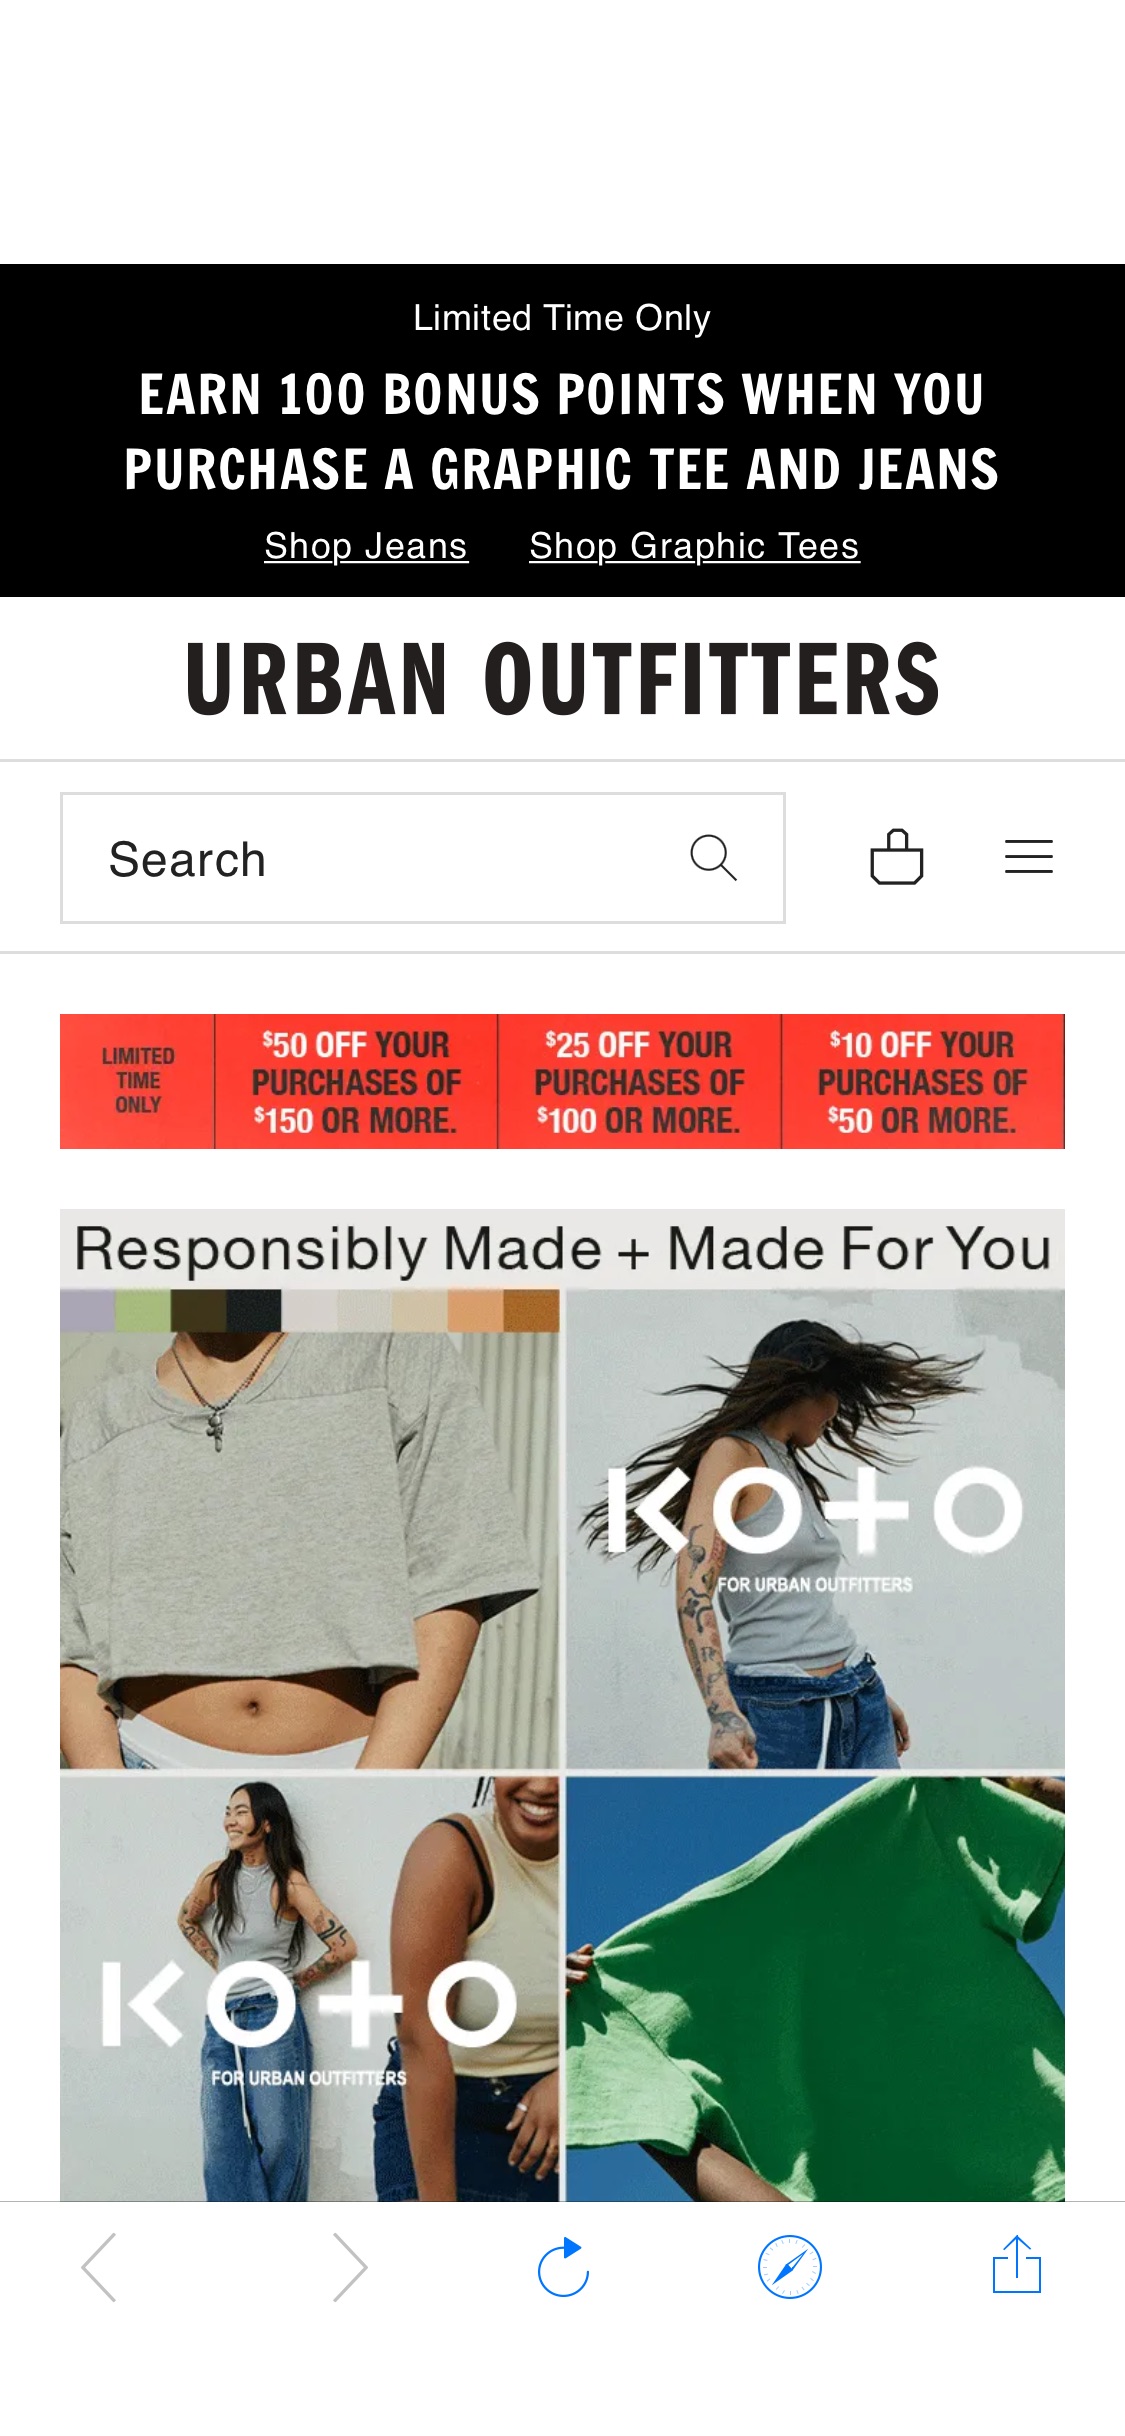 Urban Outfitters 现有50-10，100-25，150-50活动